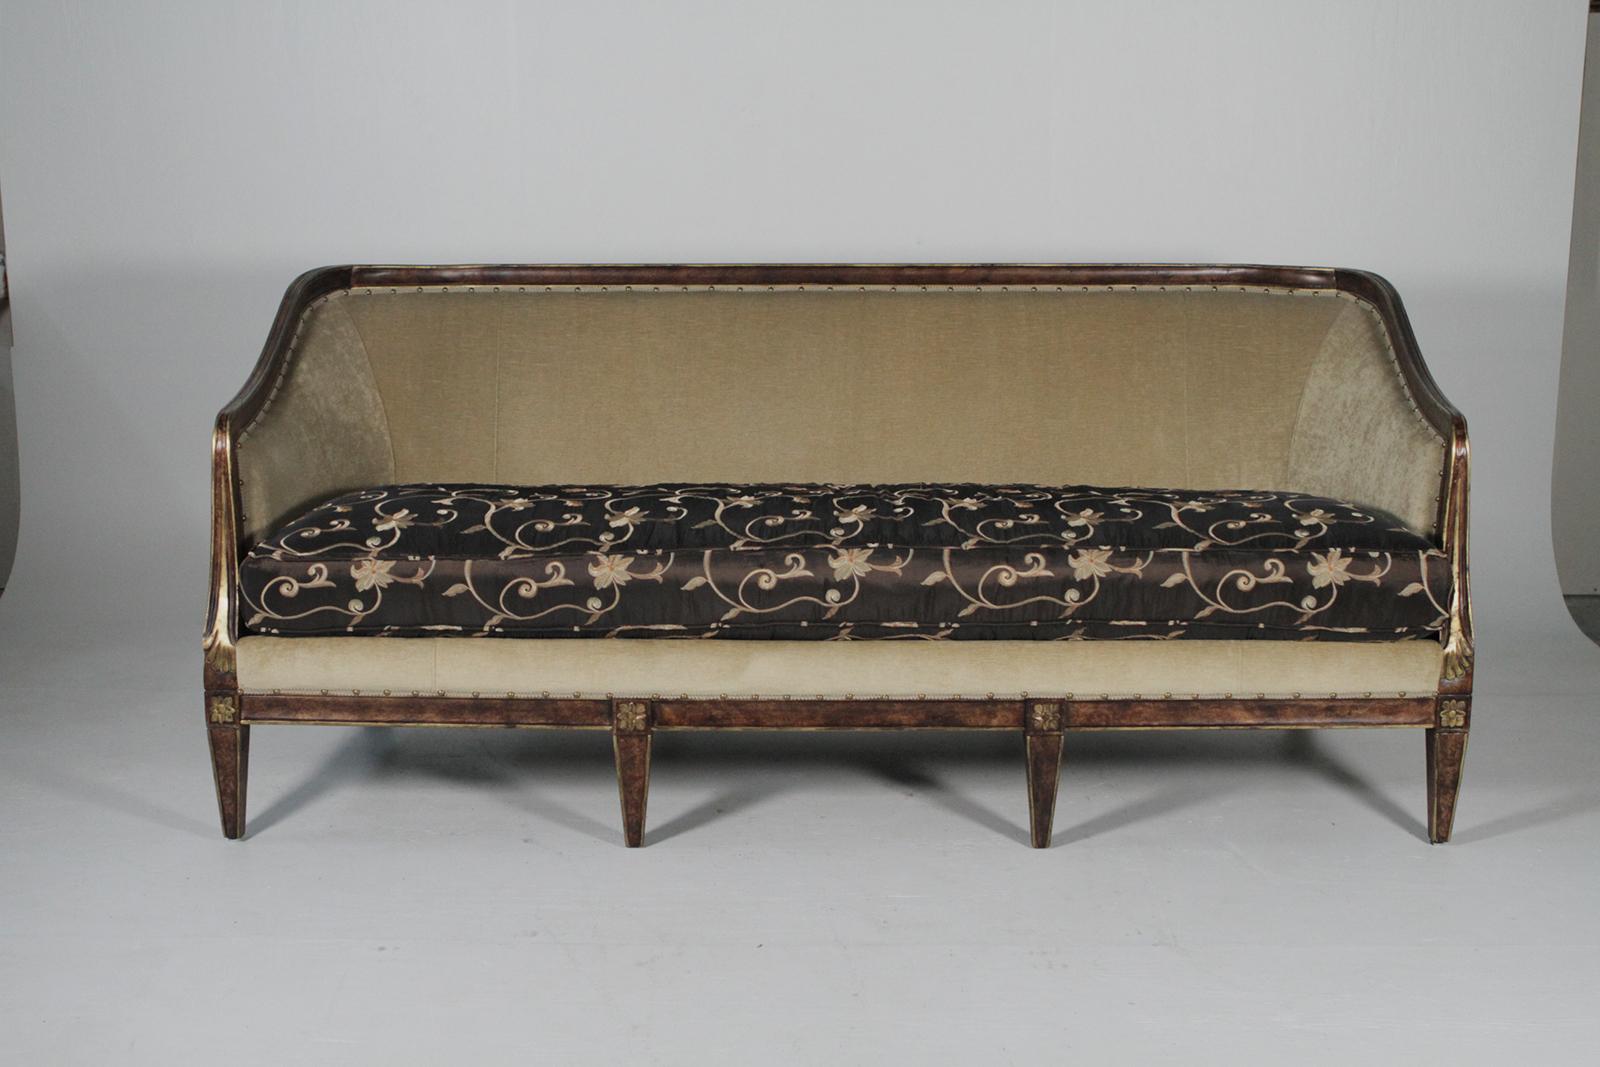 Walnut sofa with gilt details upholstered in a quality fawn velvet and chocolate embroidered silk. The curved attached back with contrasting loose cushion with nailhead trim around the edge.